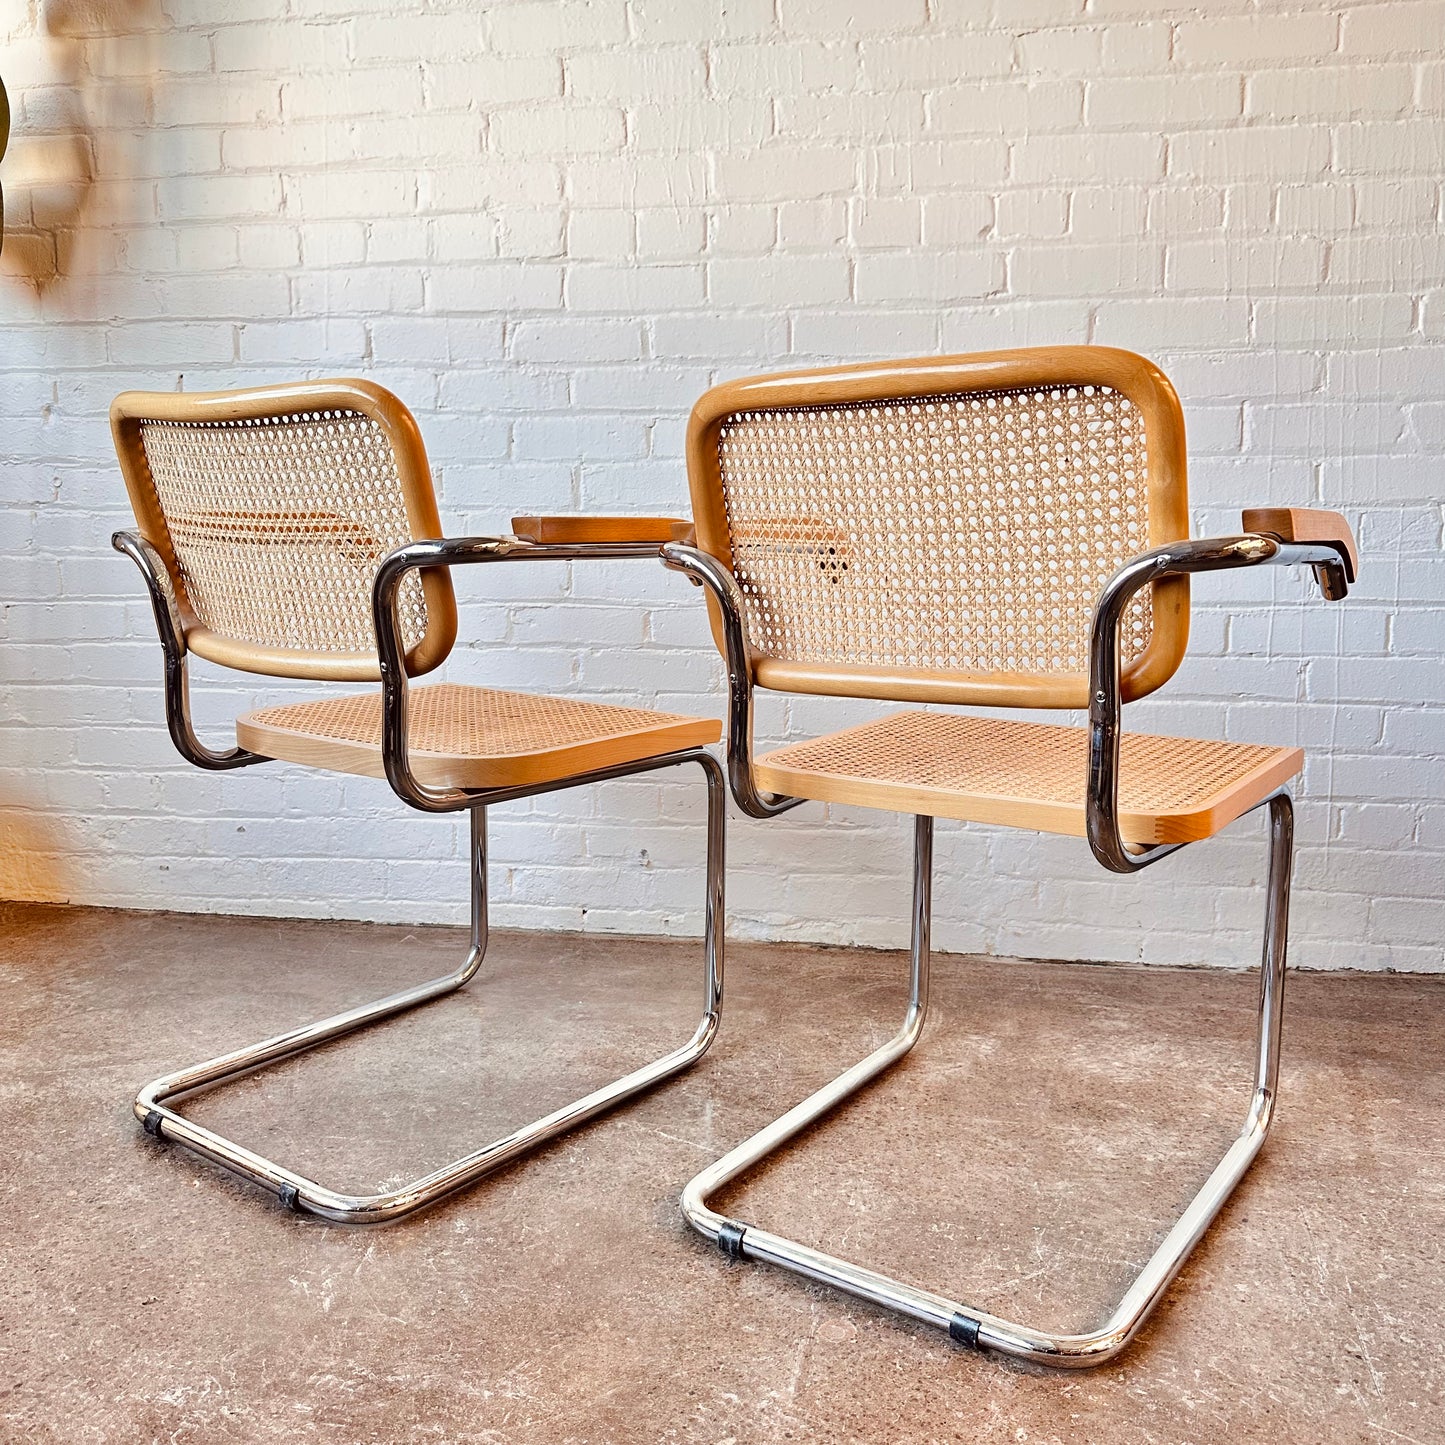 MARCEL BREUER CESCA CANED ARM CHAIRS - SET OF 6 MADE IN ITALY